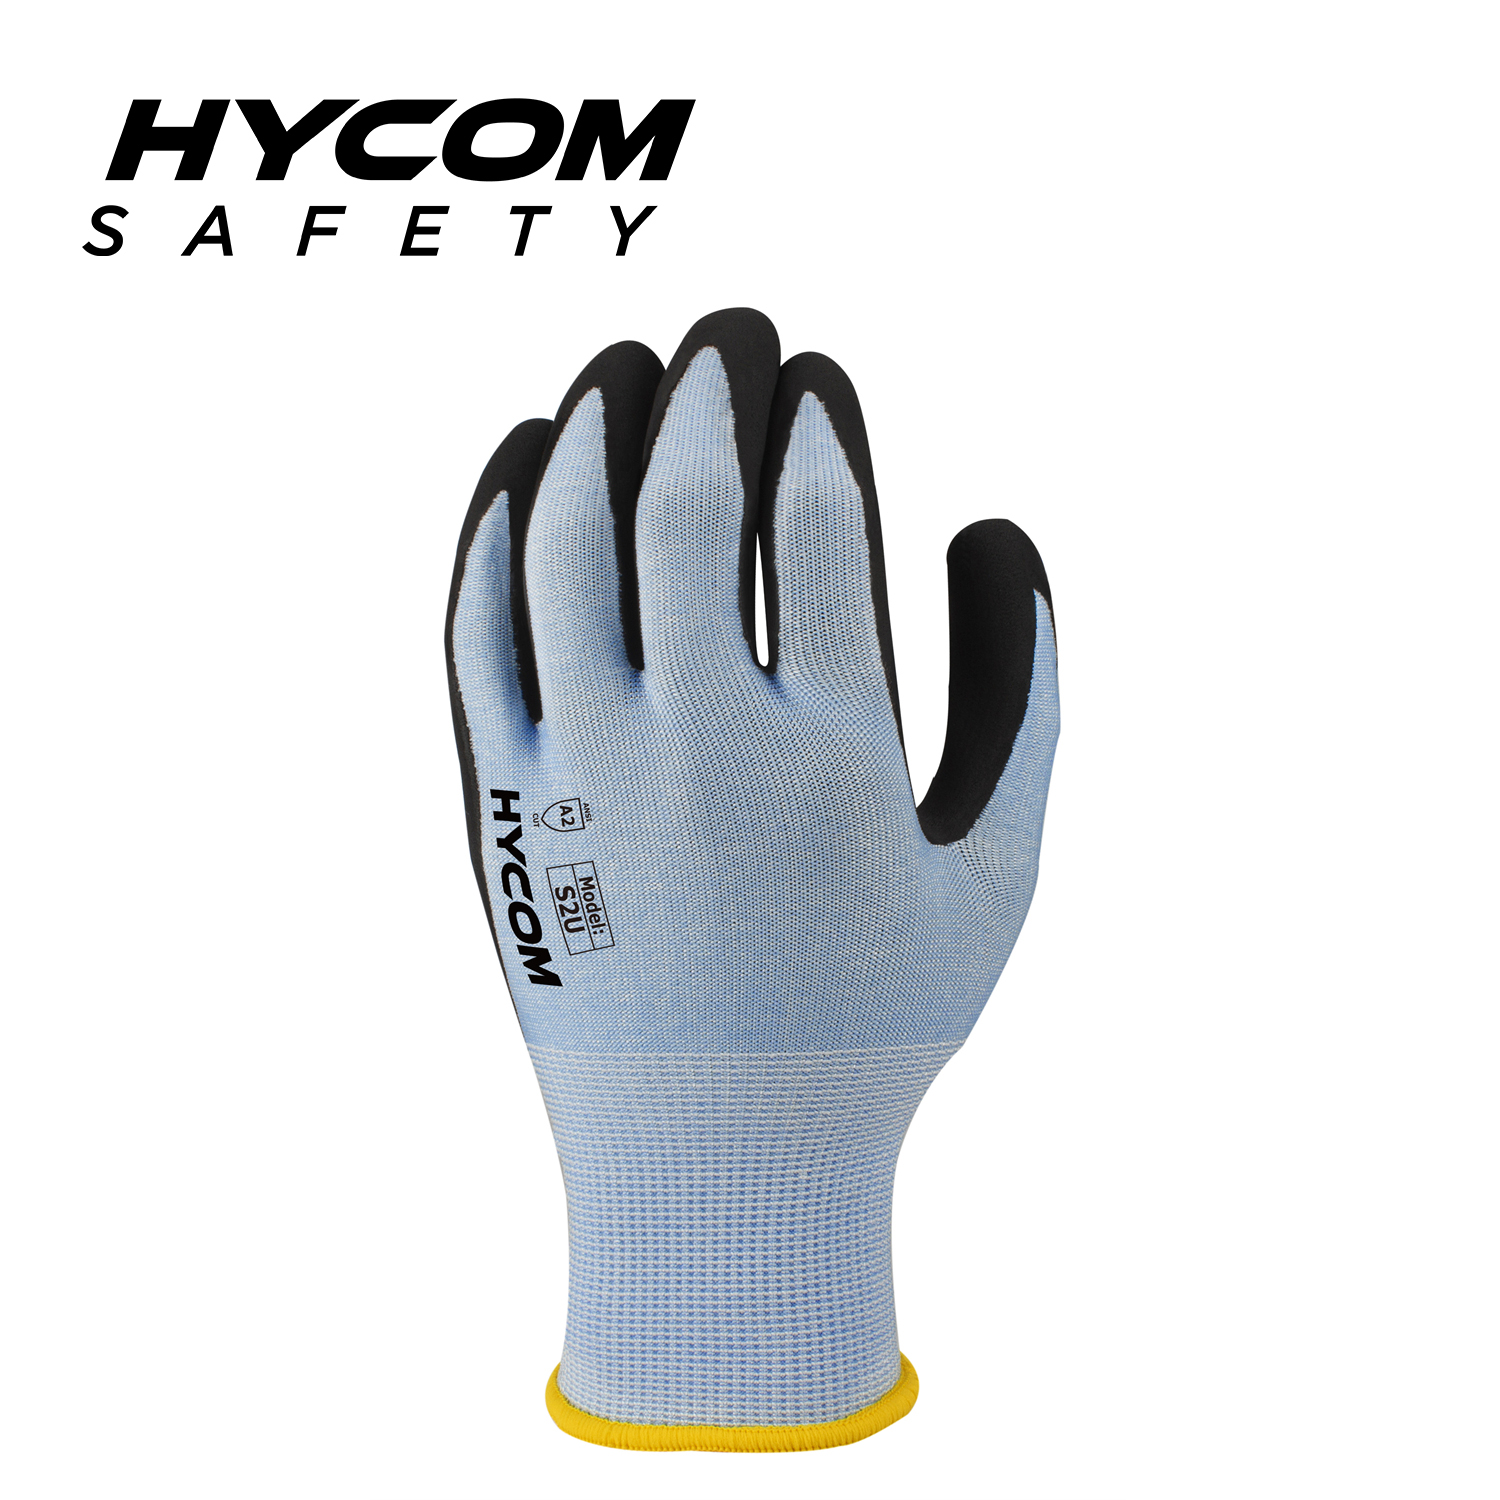 HYCOM 18G ANSI 2 Flexible Cut Resistant Glove with Palm Nitrile Coating Super Thiner Safety Gloves